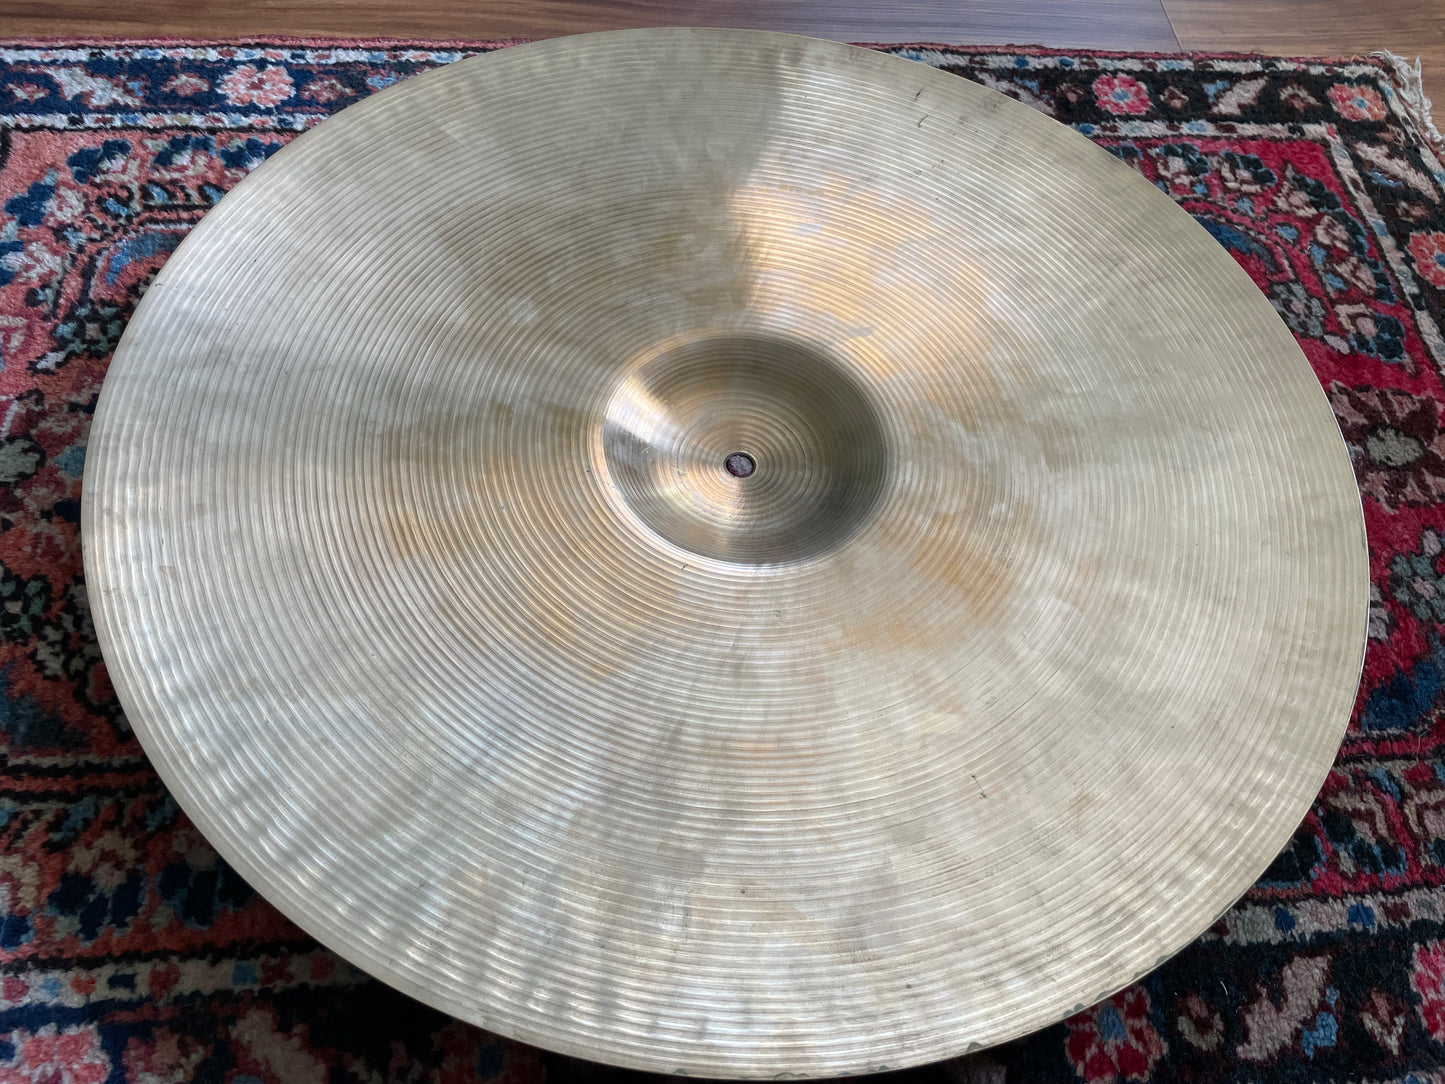 20" Paiste Pre-Serial Number Formula 602 Ride Cymbal 2478g #800